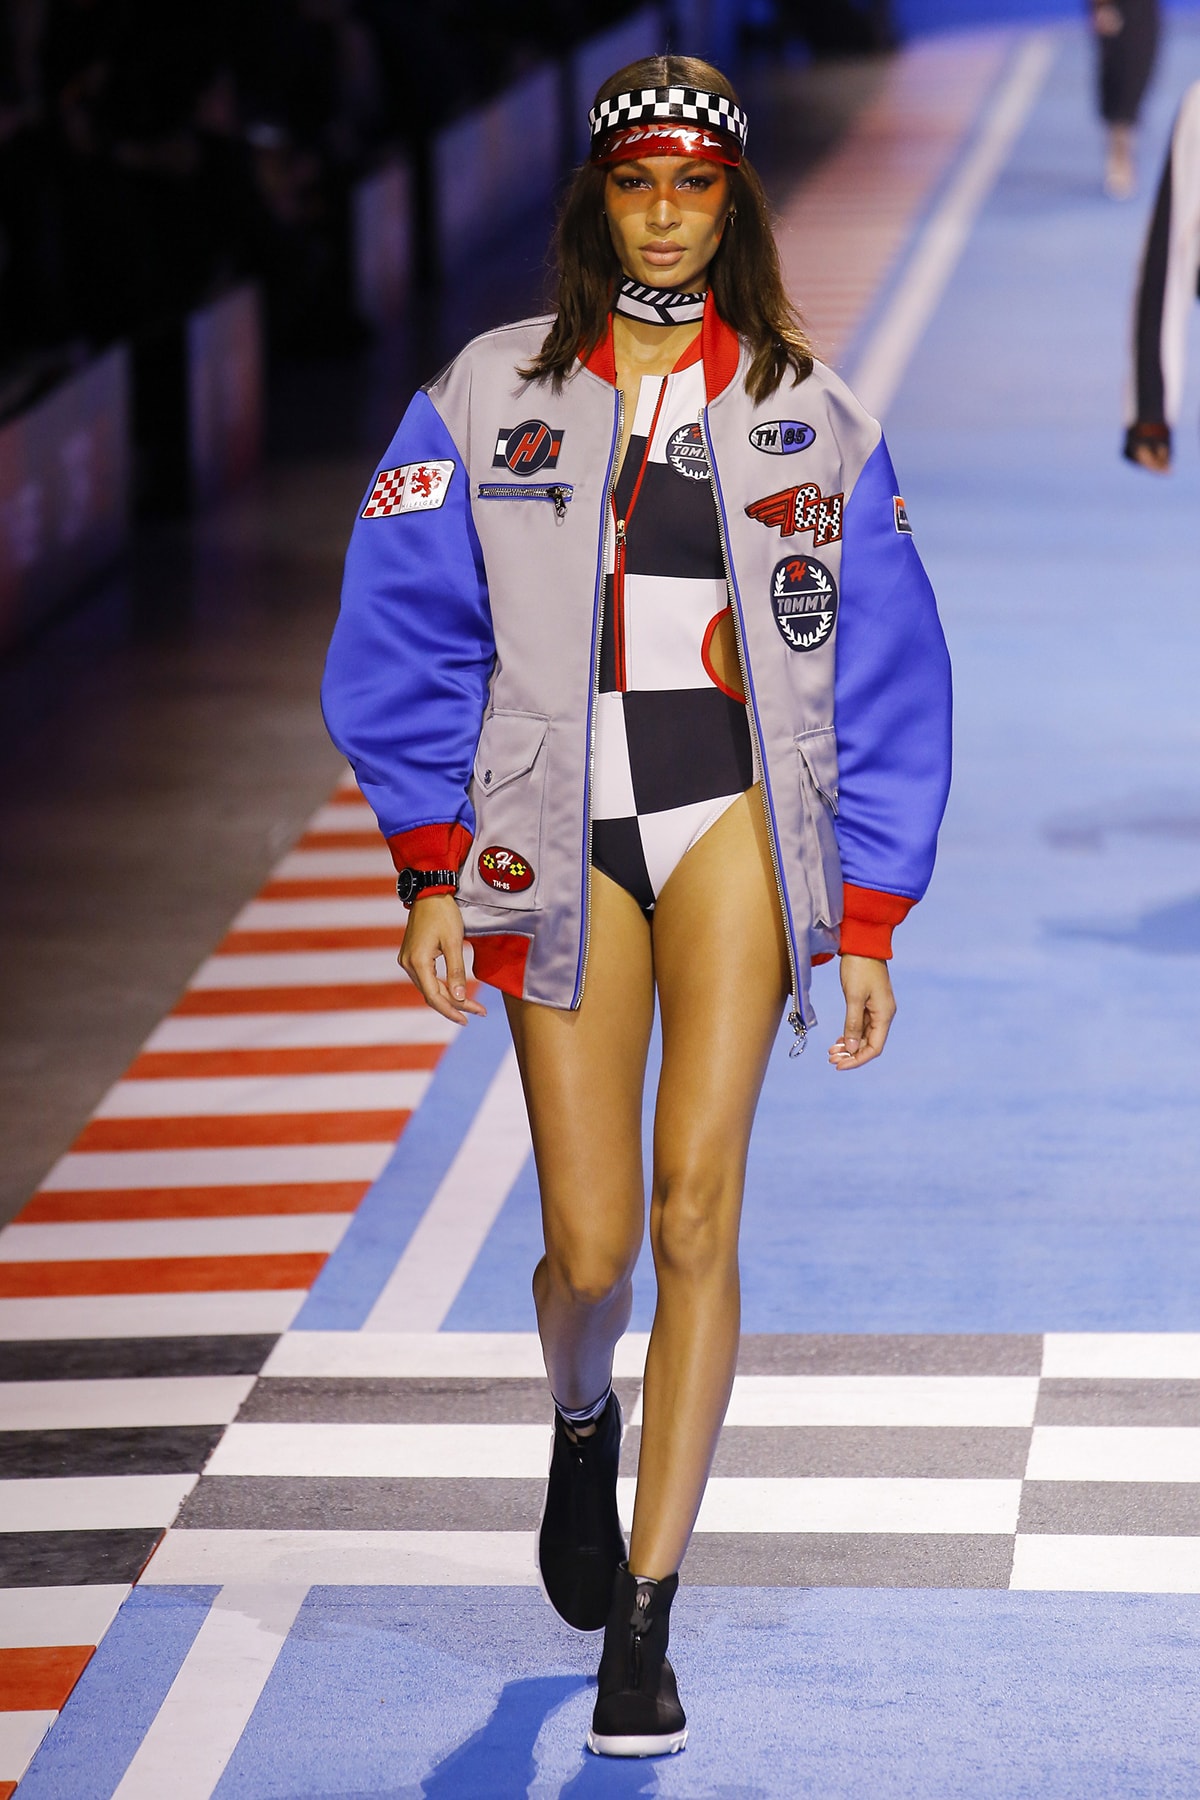 Tommy Hilfiger's Spring 2018 Adaptive Collection Is Here